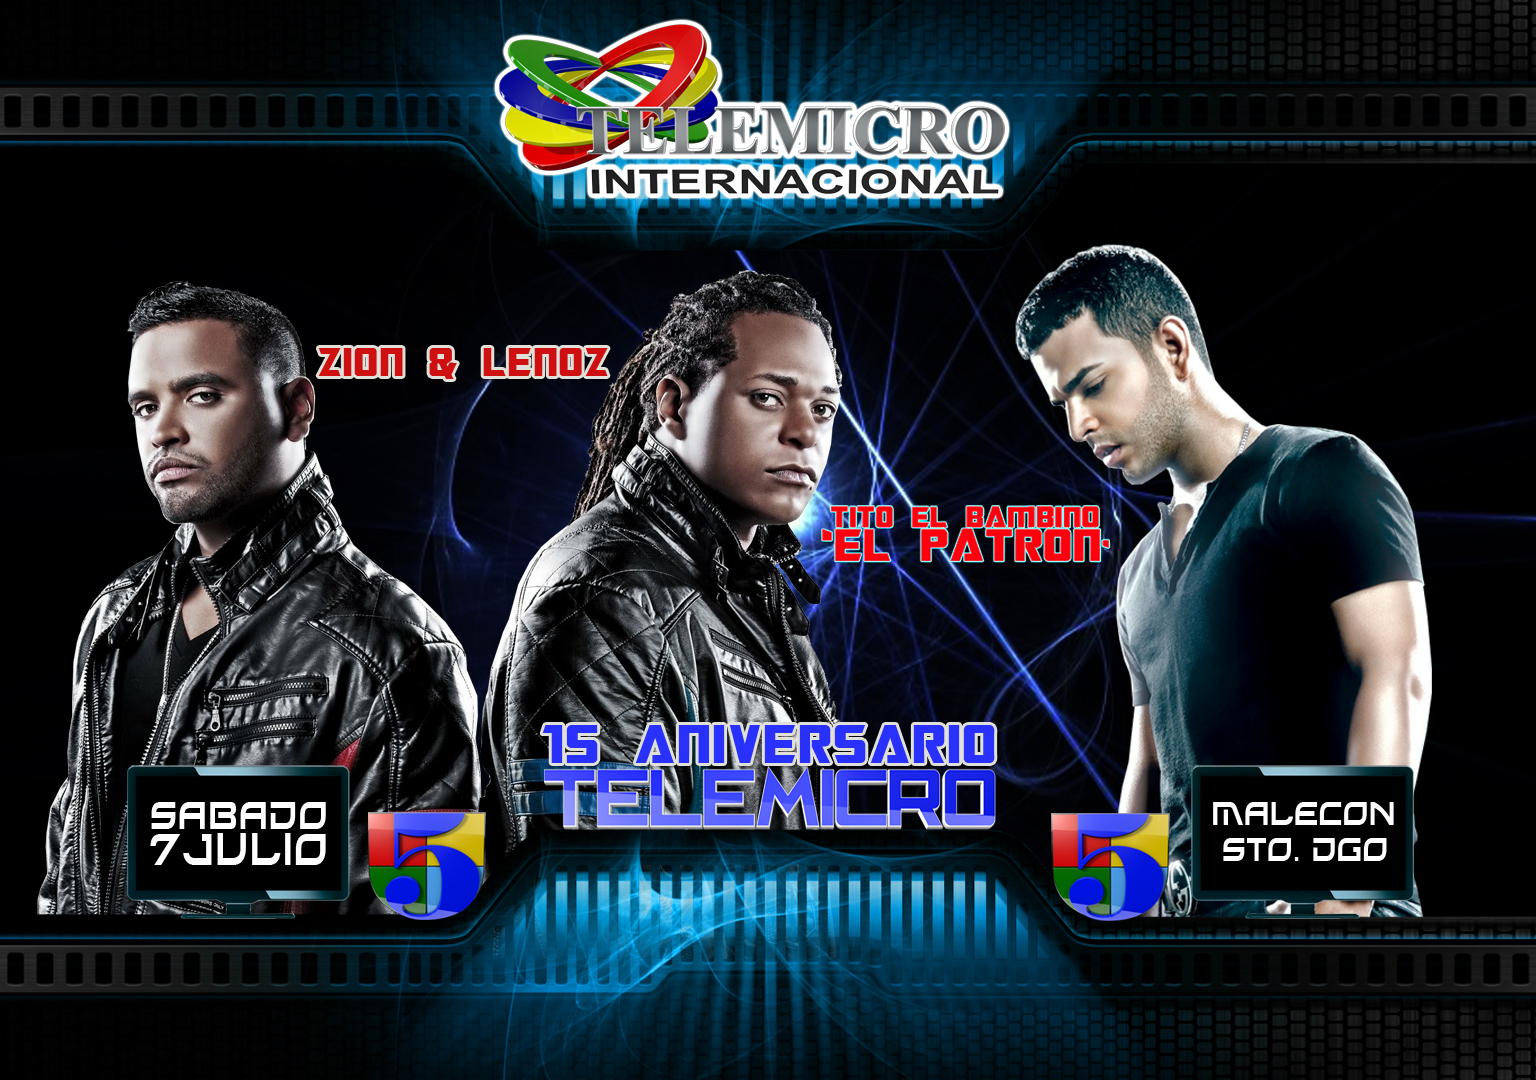 Poster from Telemicro 15th Anniversary Live Concert